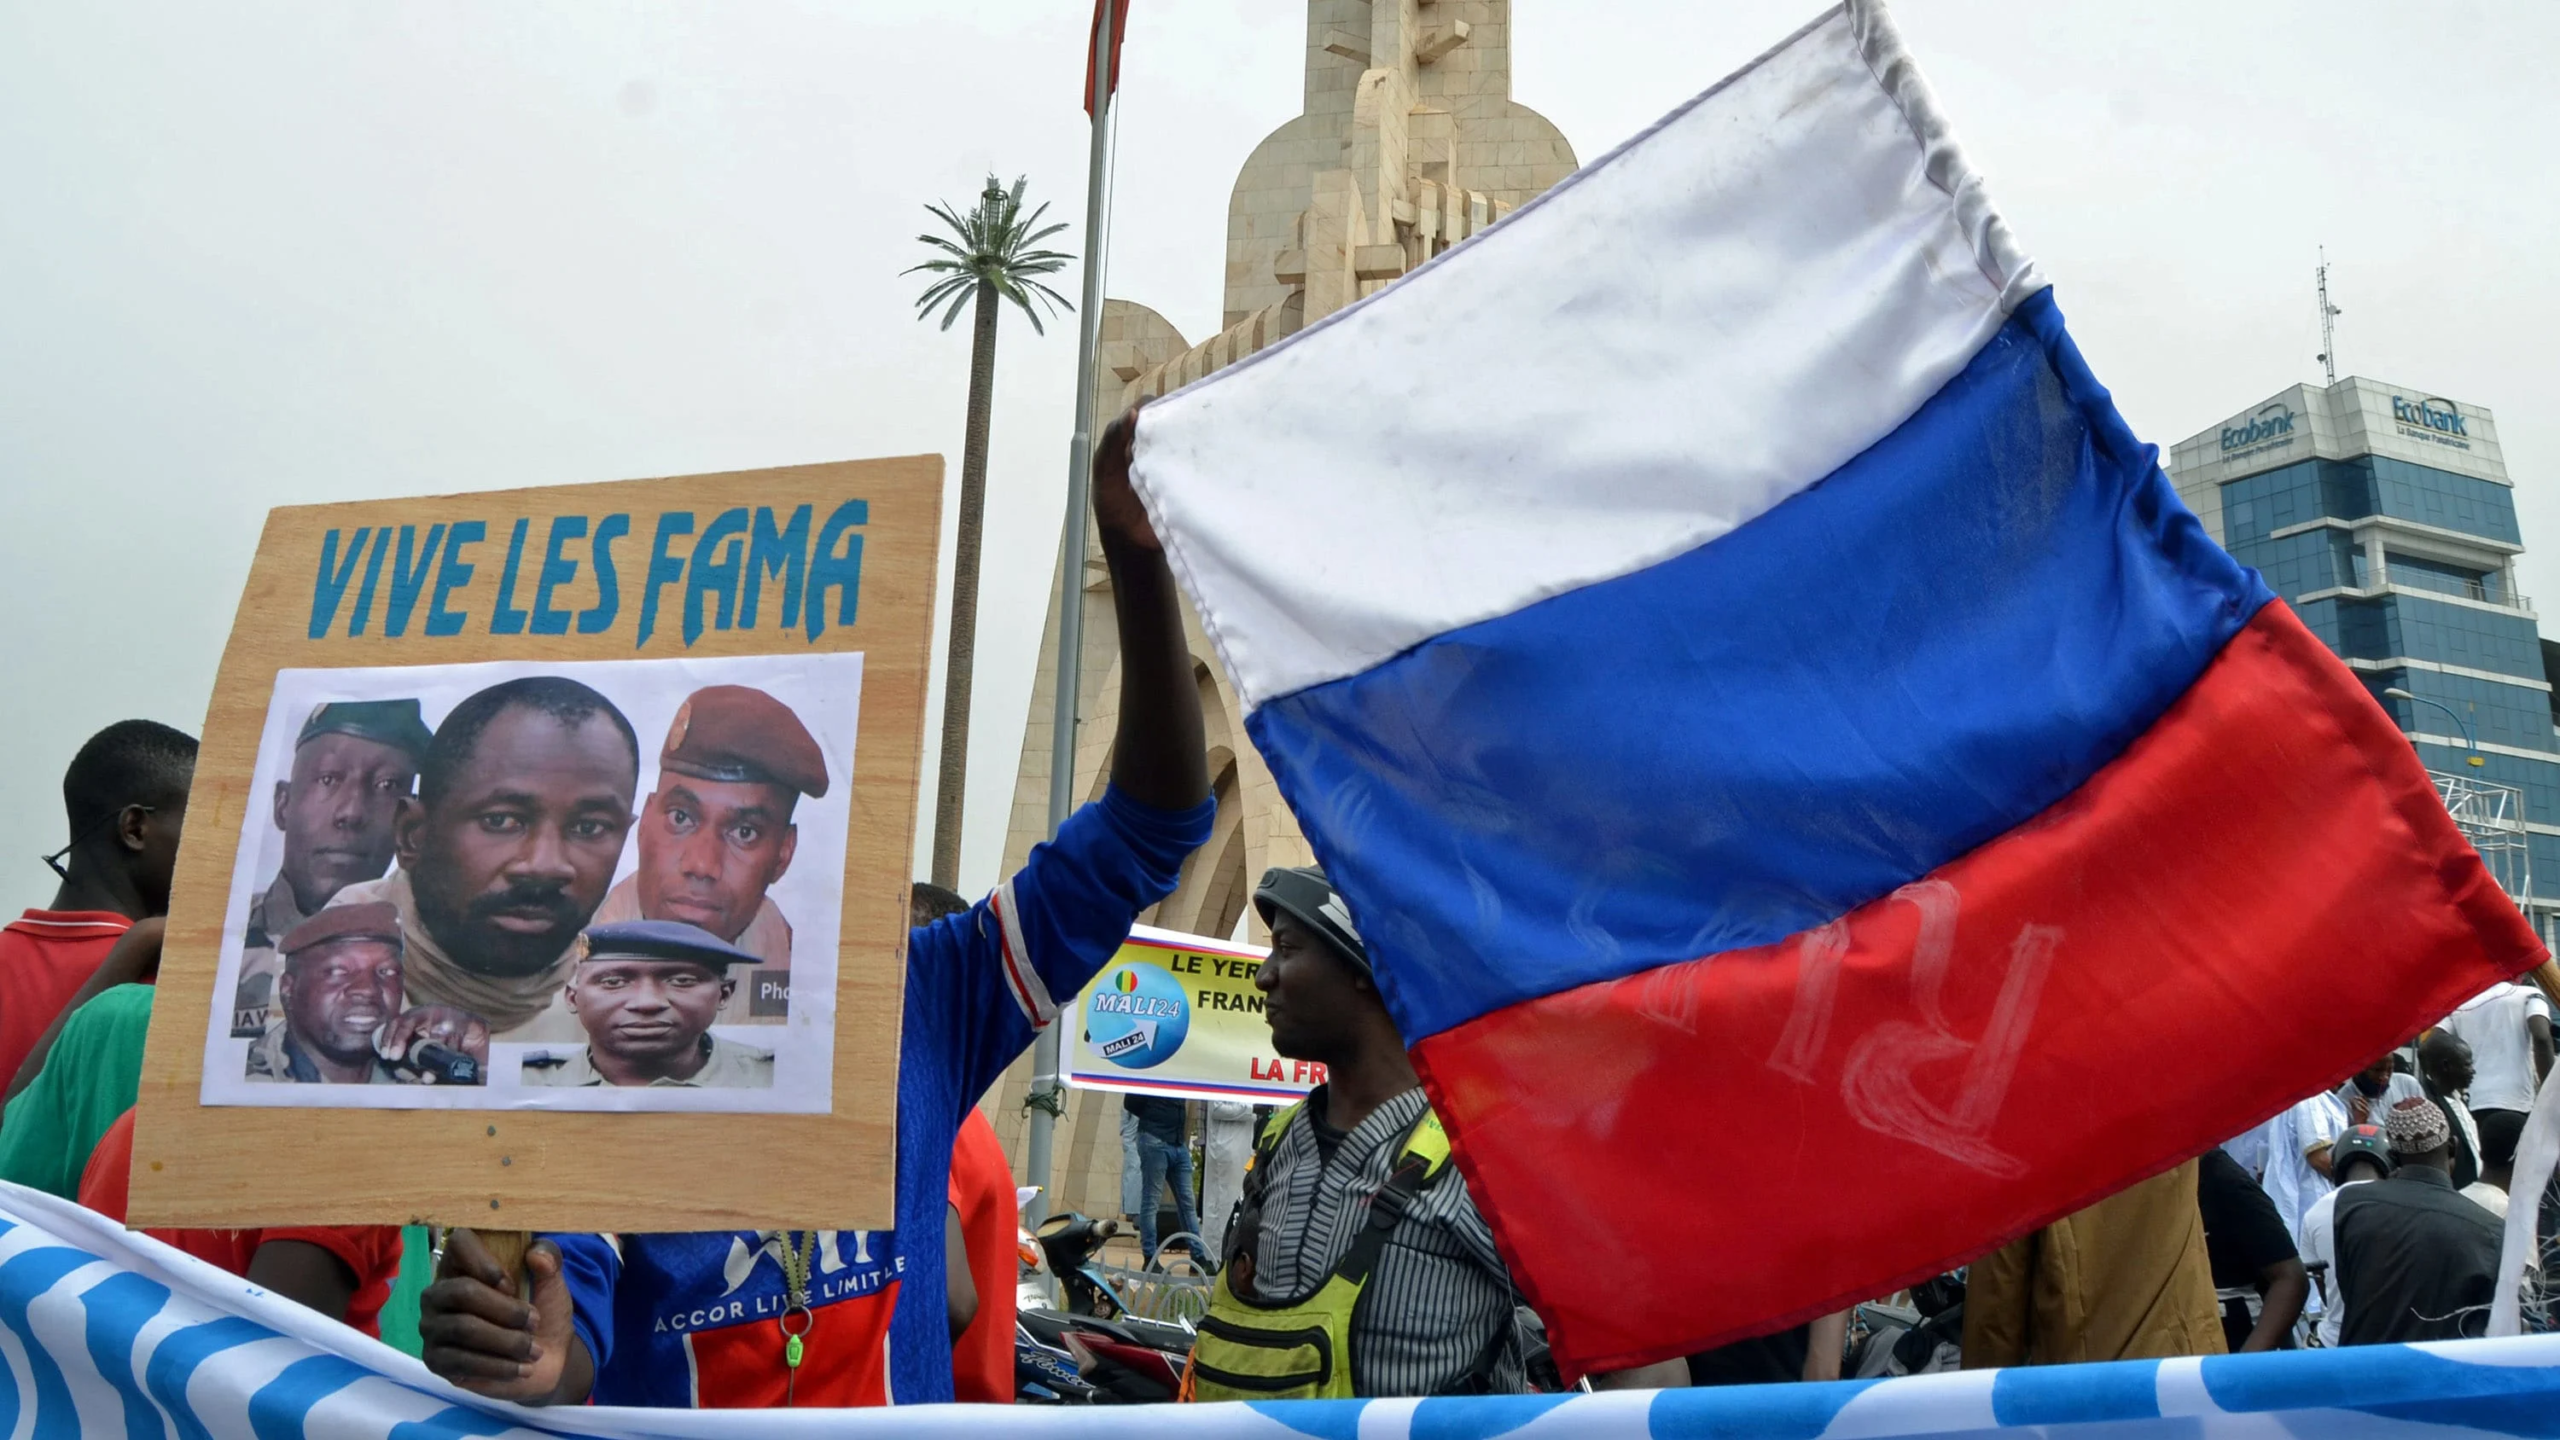 How These Mali Coup Plotters Staged a False Flag Pro-Russia March